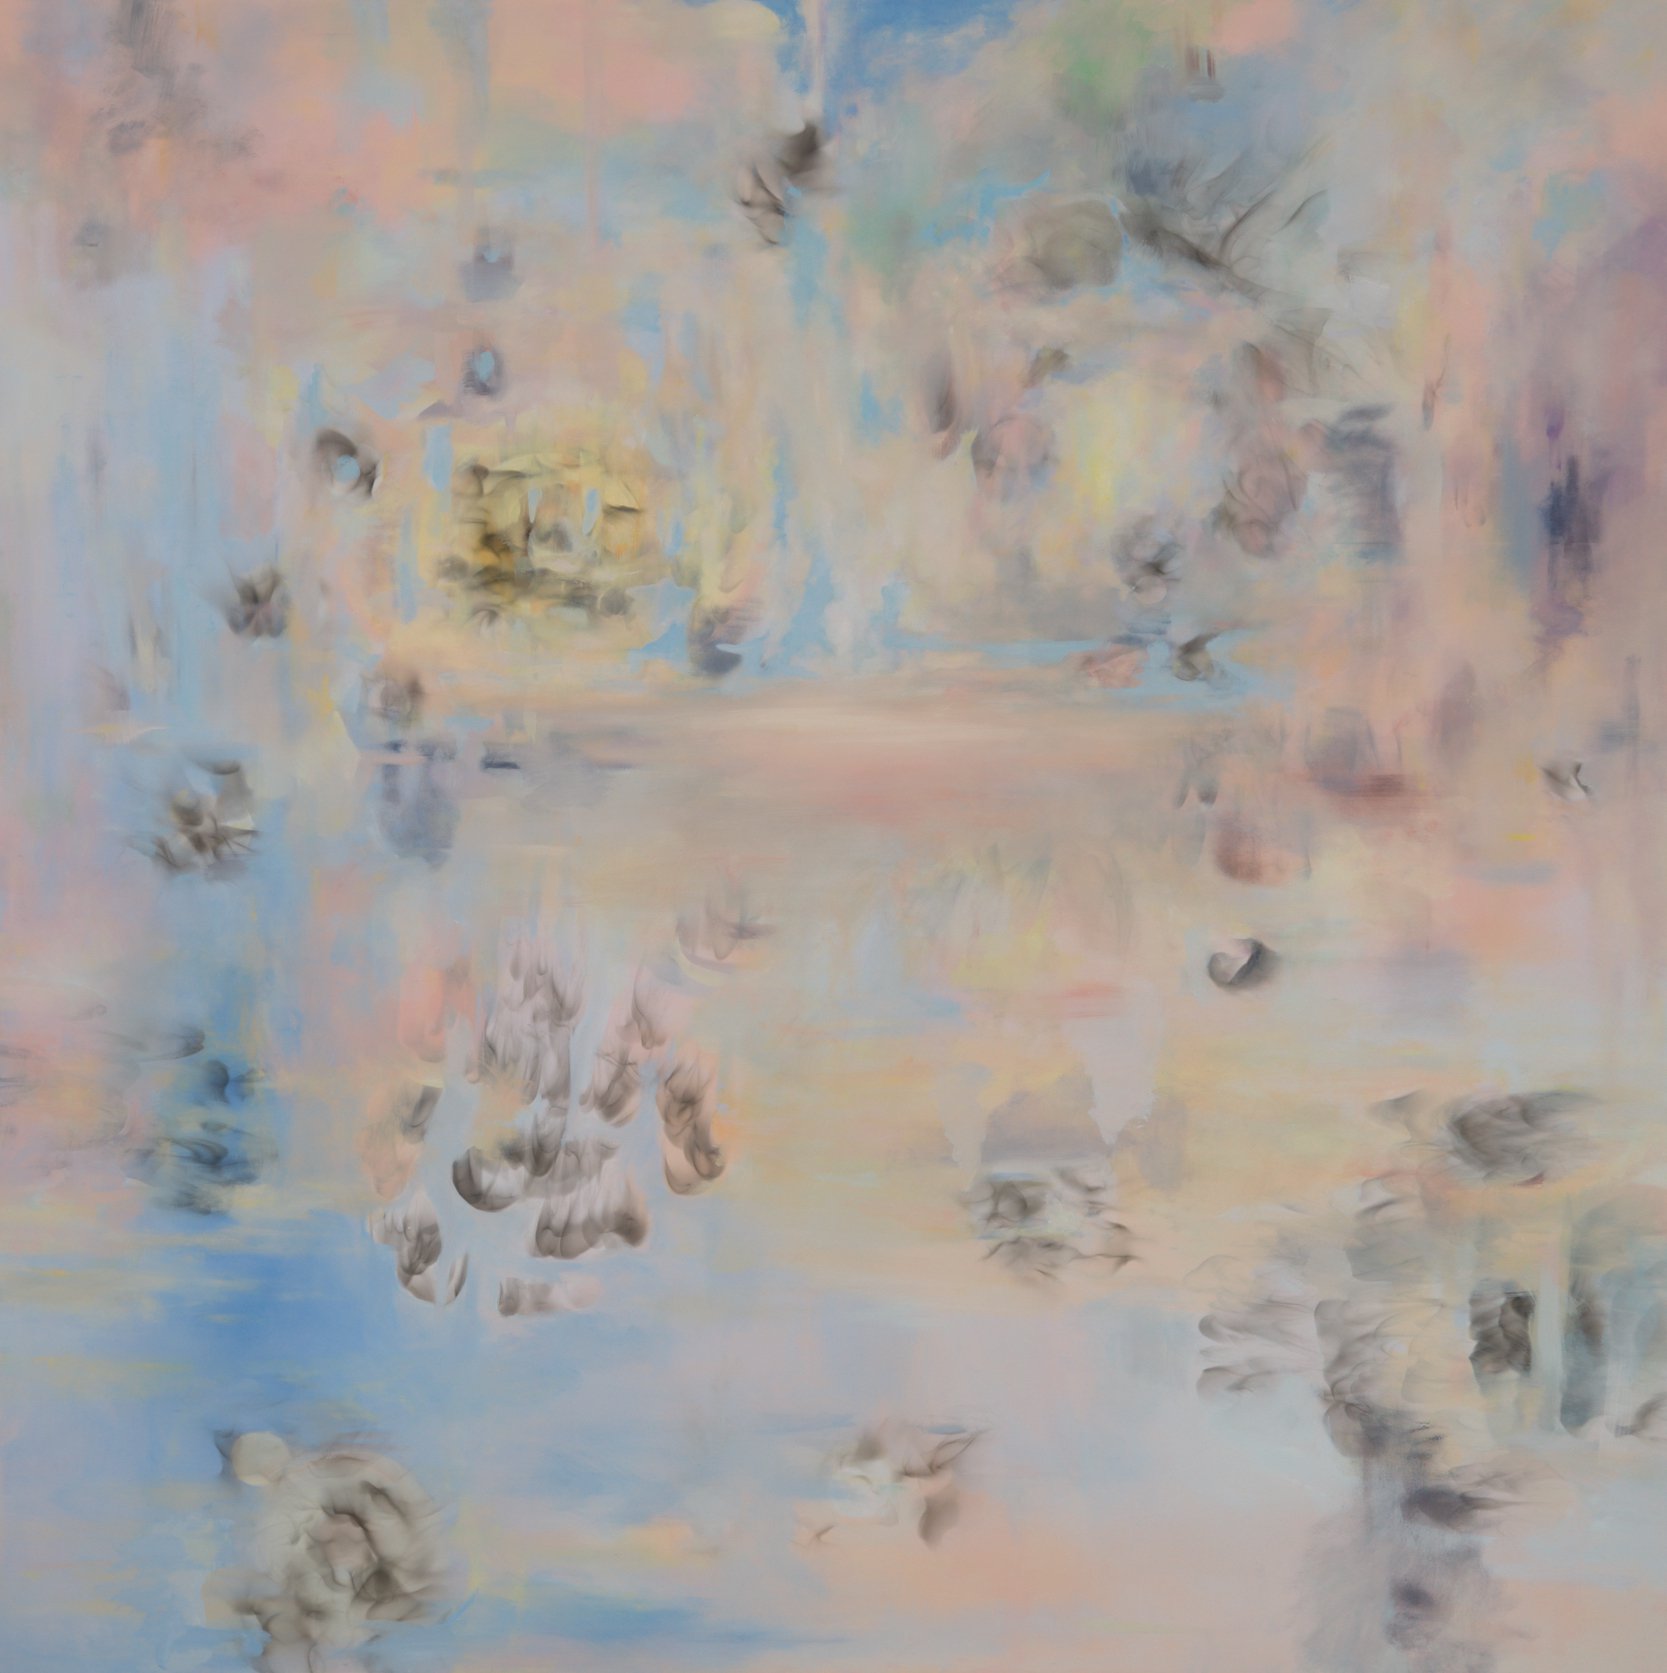 Eftihis Patsourakis, Untitled, oil, acrylic and smoke on canvas, 180 x 200 x 4 cm (70 7/8 x 78 3/4 x 1 5/8 in), 2022